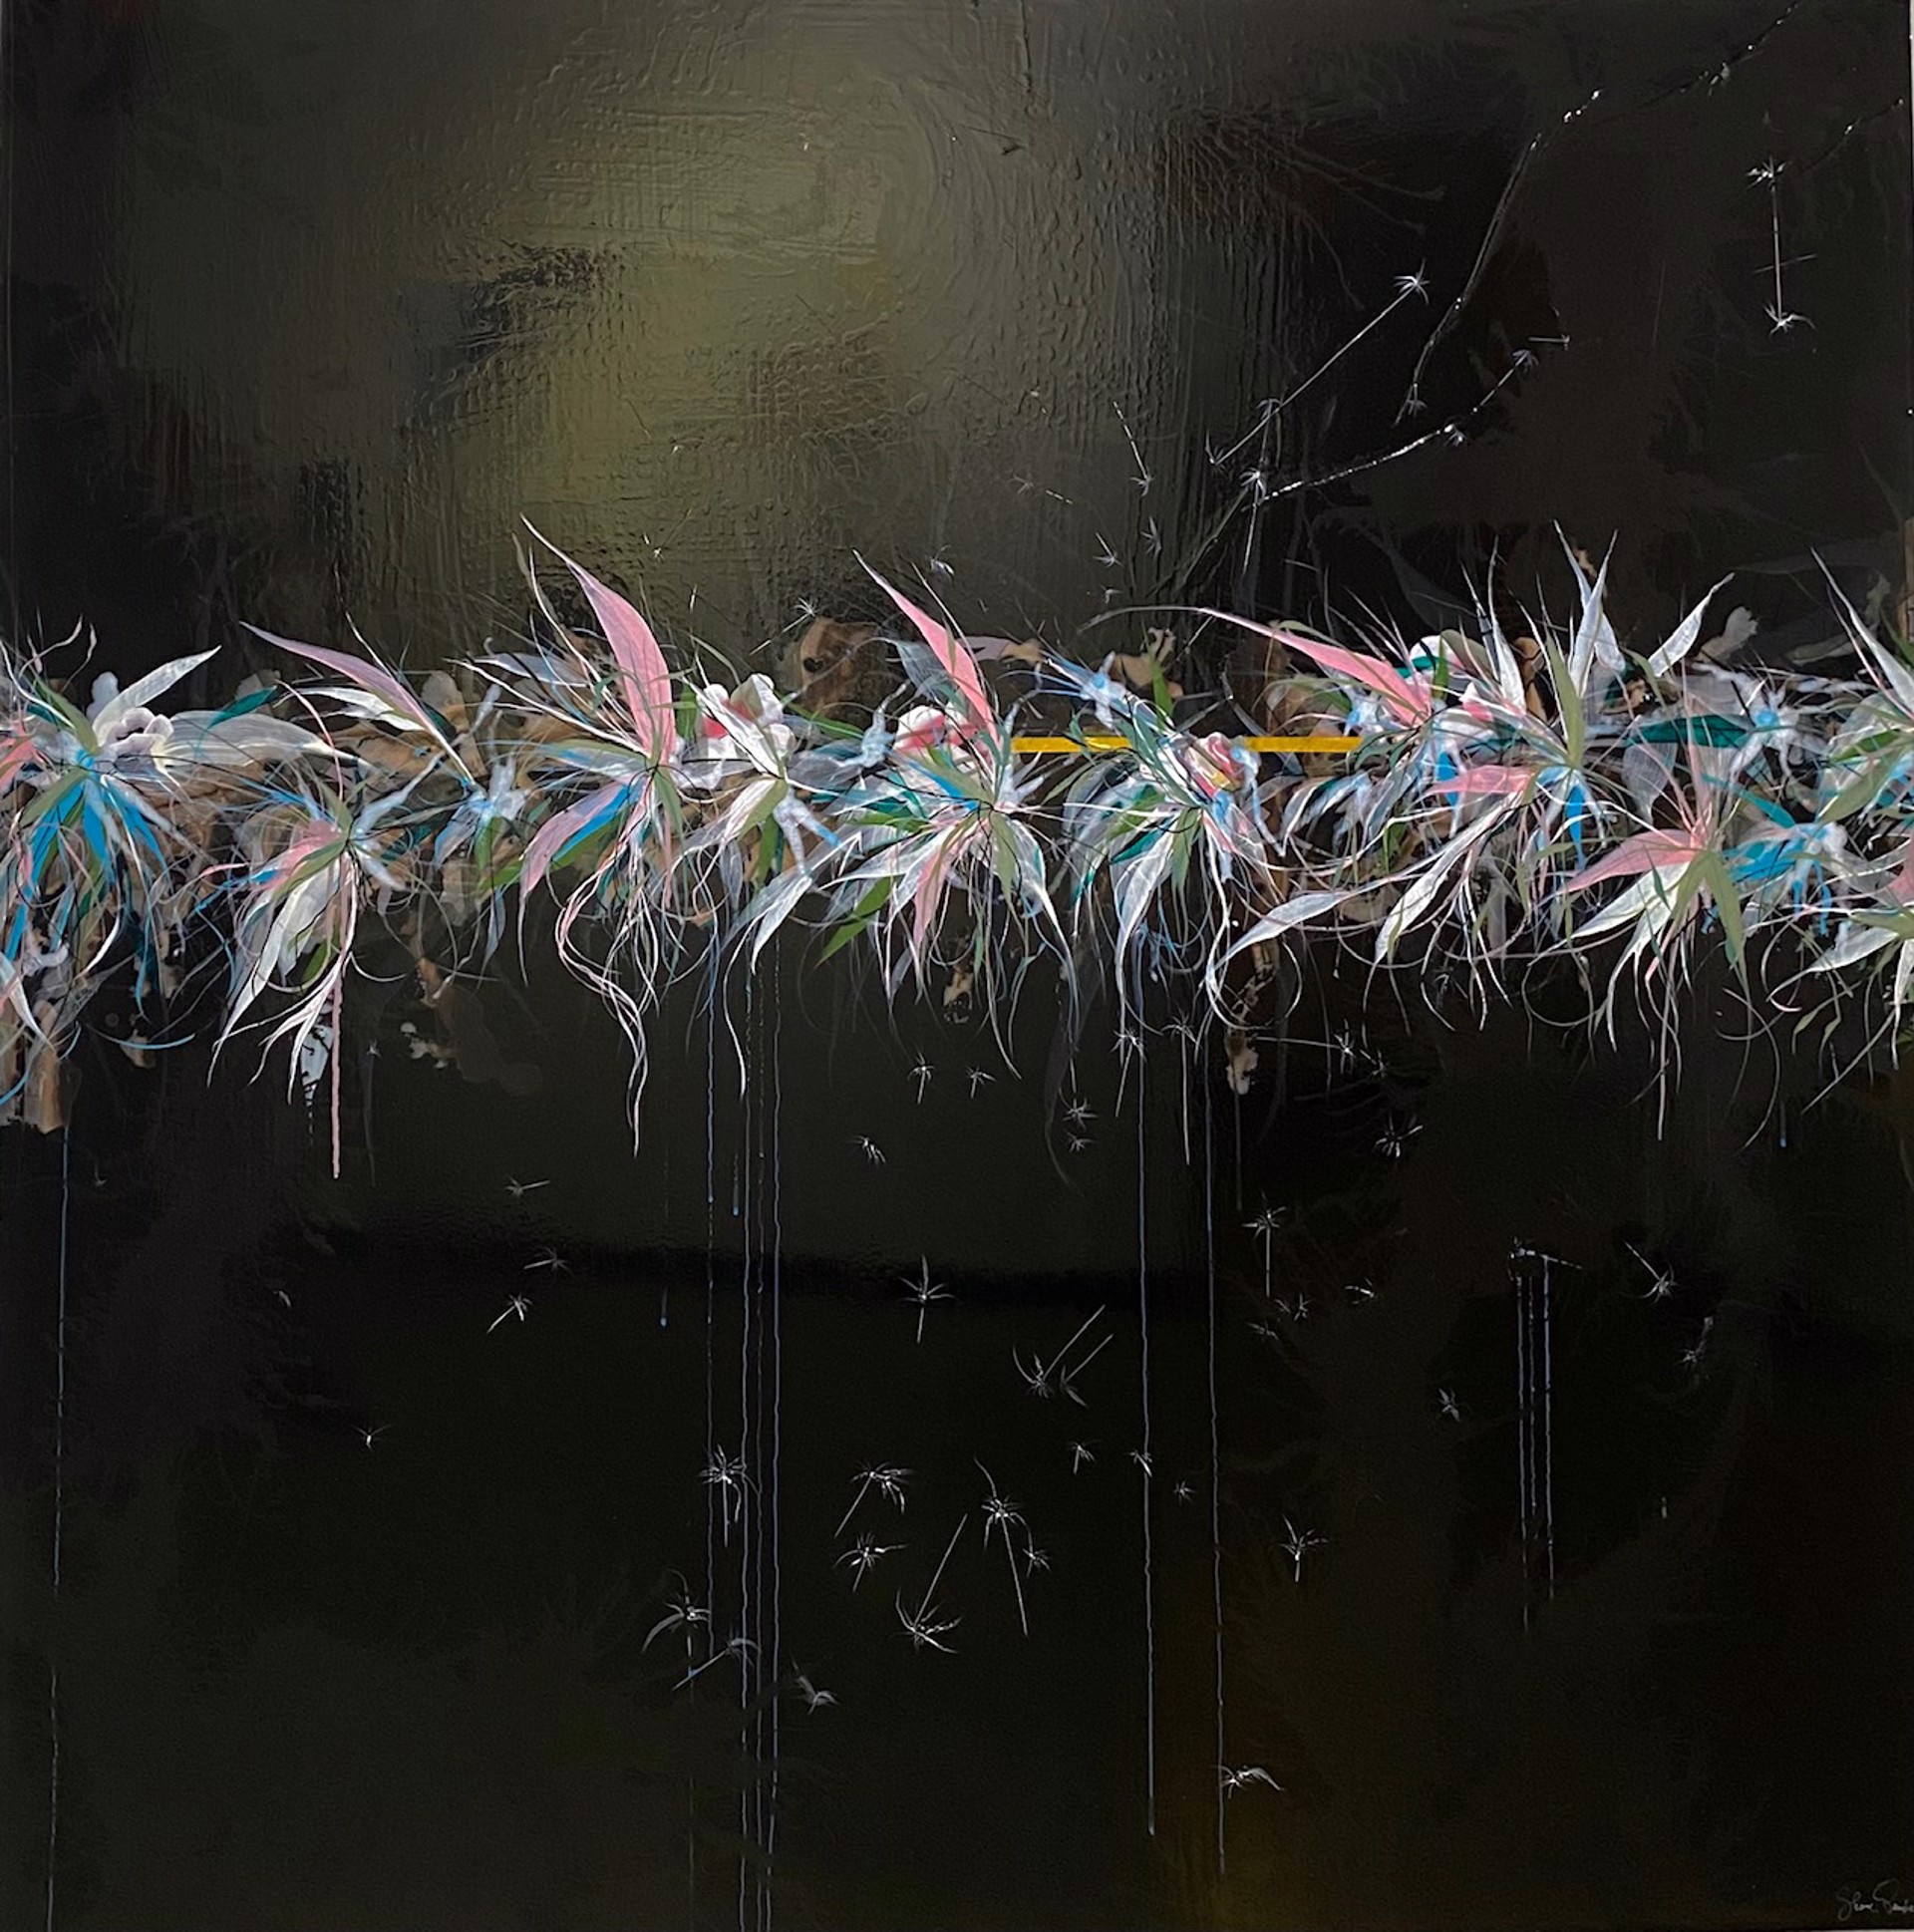 Black square painting with a strip of colorful flowers in a horizontal line in the top half of the image.